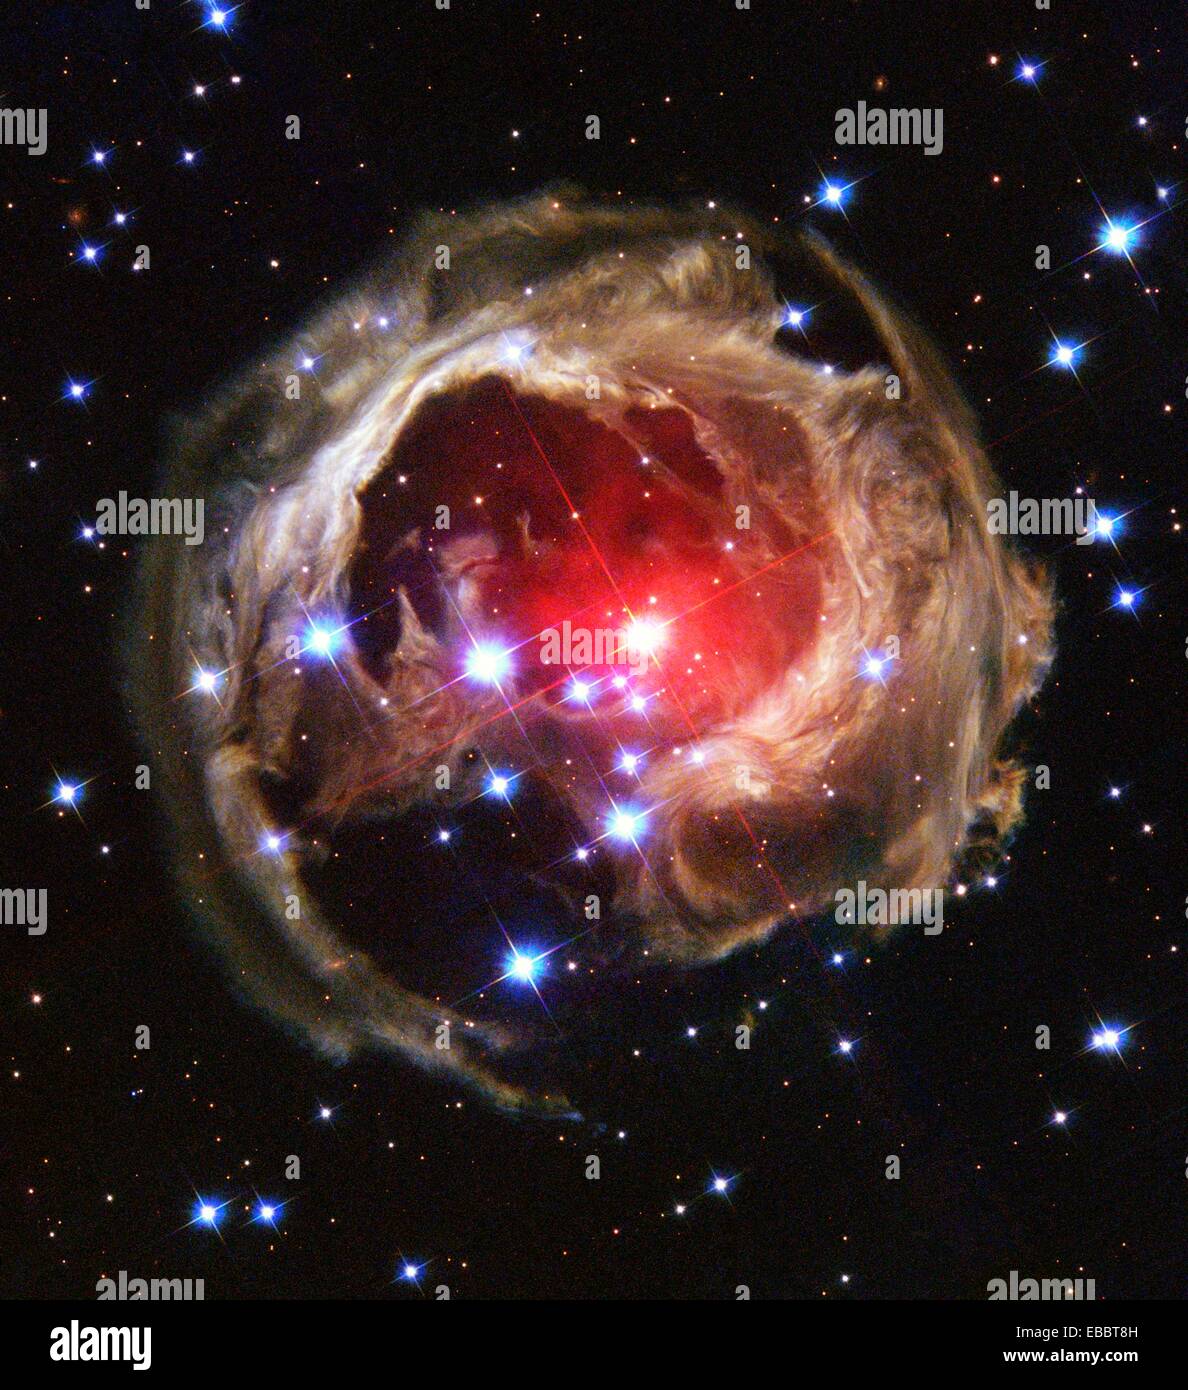 What caused this outburst of V838 Mon? For reasons unknown, star V838 Mon's outer surface suddenly greatly expanded with the Stock Photo